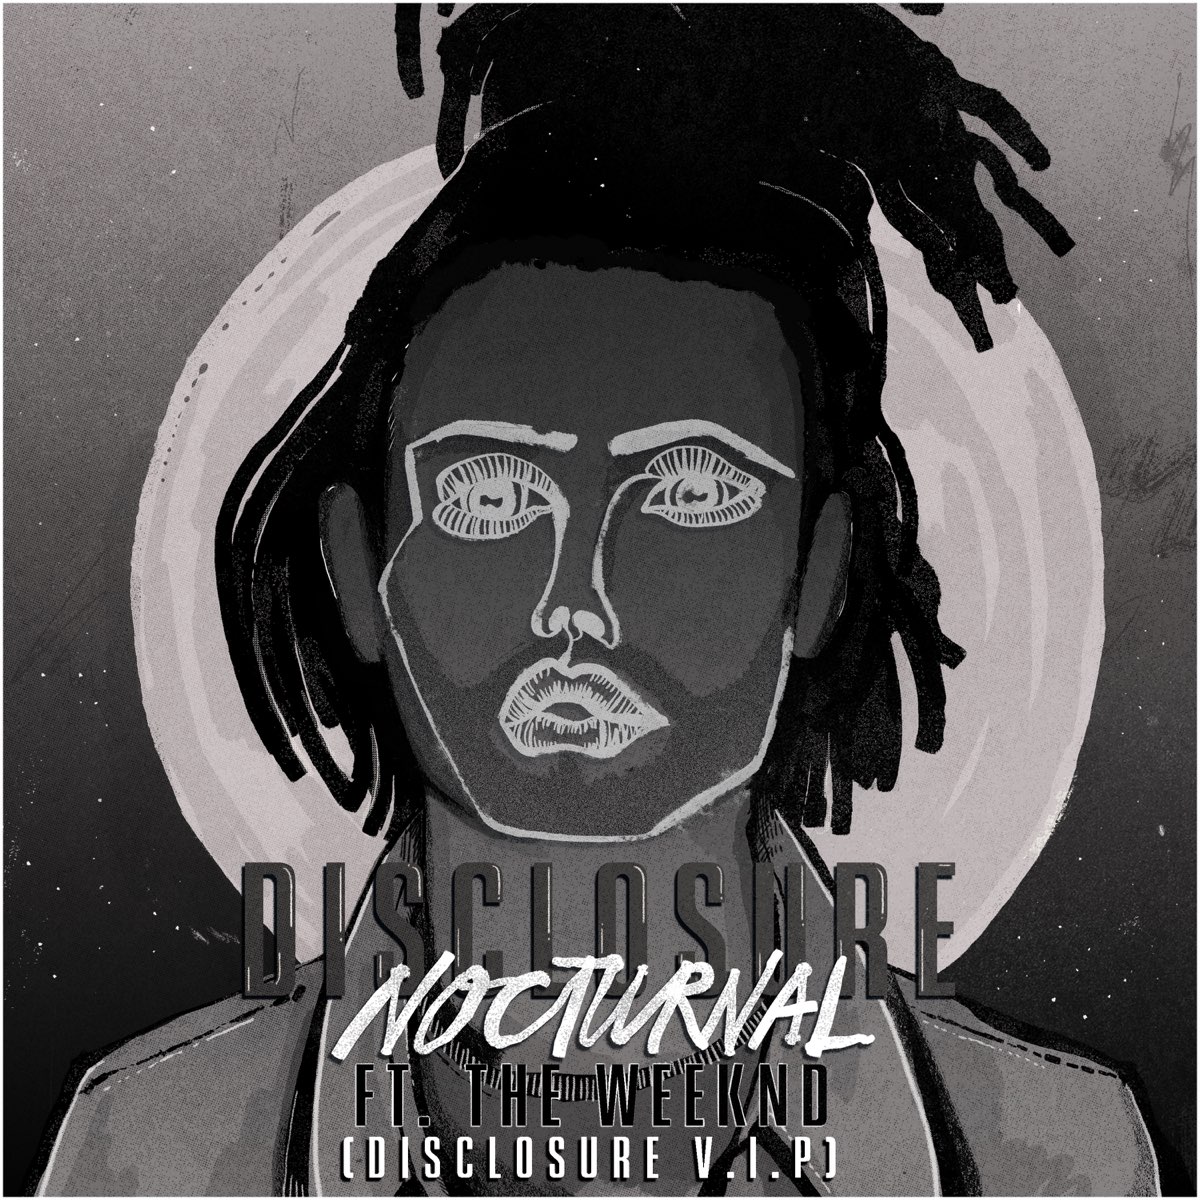 Nocturnal (feat. The Weeknd) [Disclosure V.I.P. / Edit] - Single by  Disclosure on Apple Music